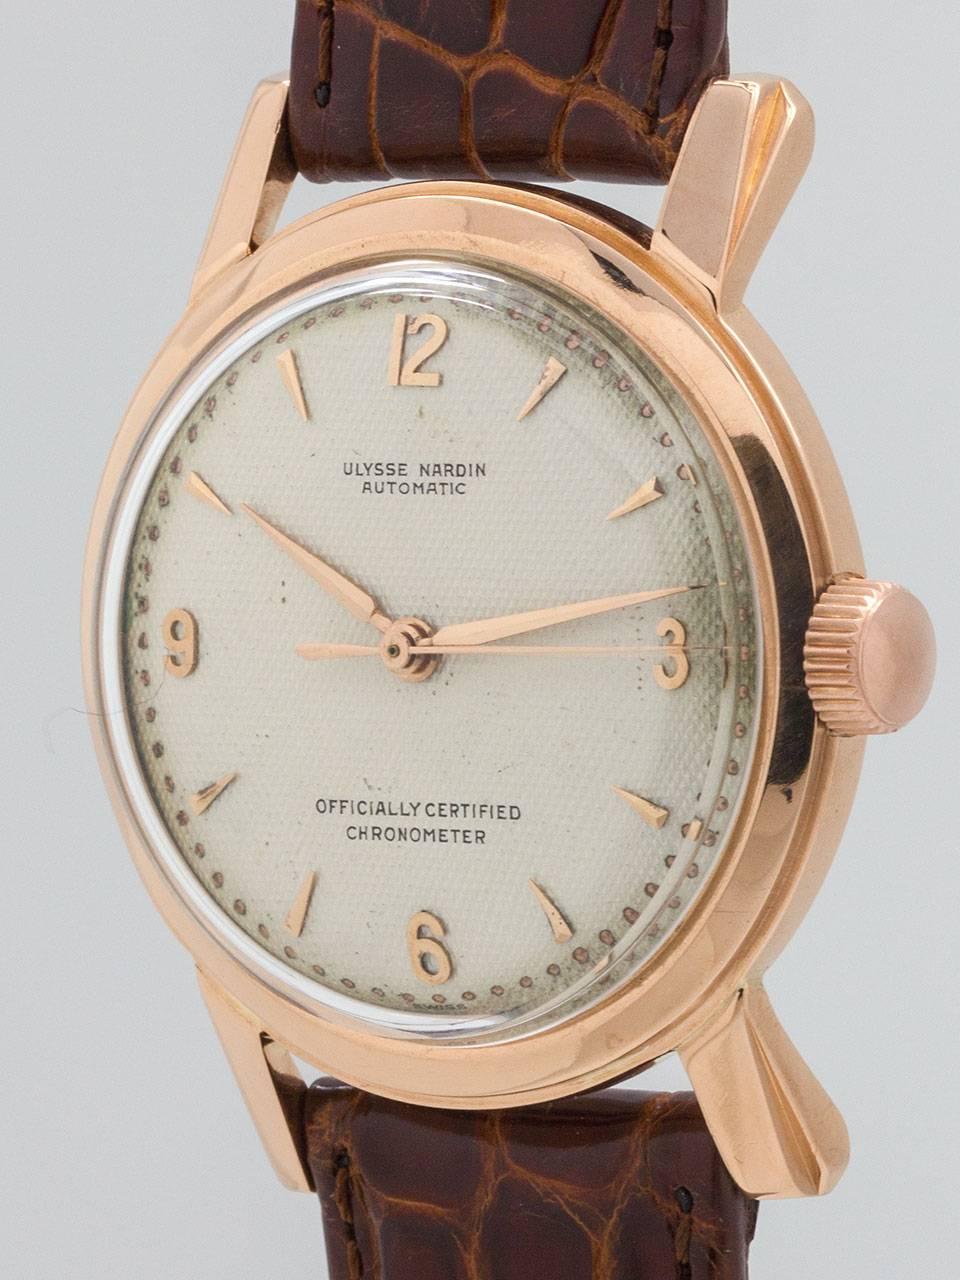 Ulysee Nardin 18K Rose Gold Automatic Dress Wristwatch circa 1950s In Excellent Condition For Sale In West Hollywood, CA